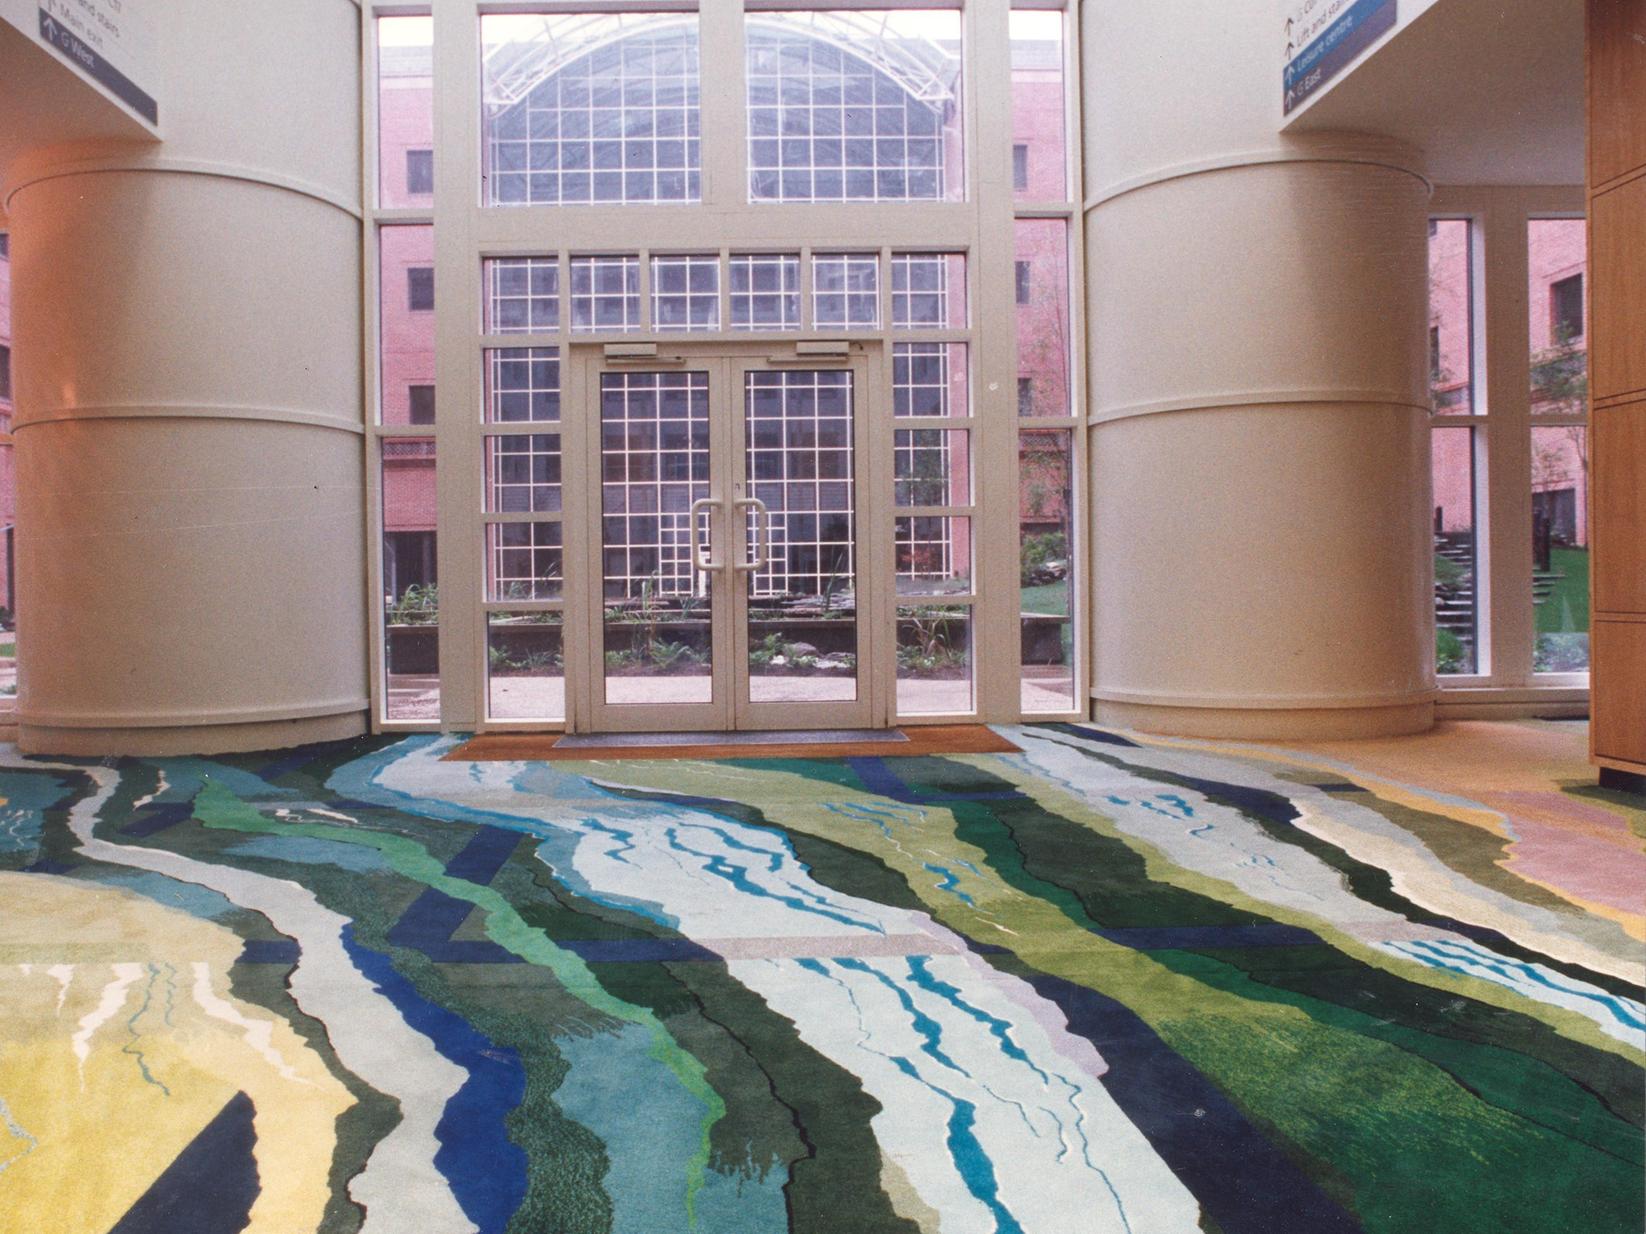 Visitors were greeted by a specially-woven water theme carpet in the foyer.